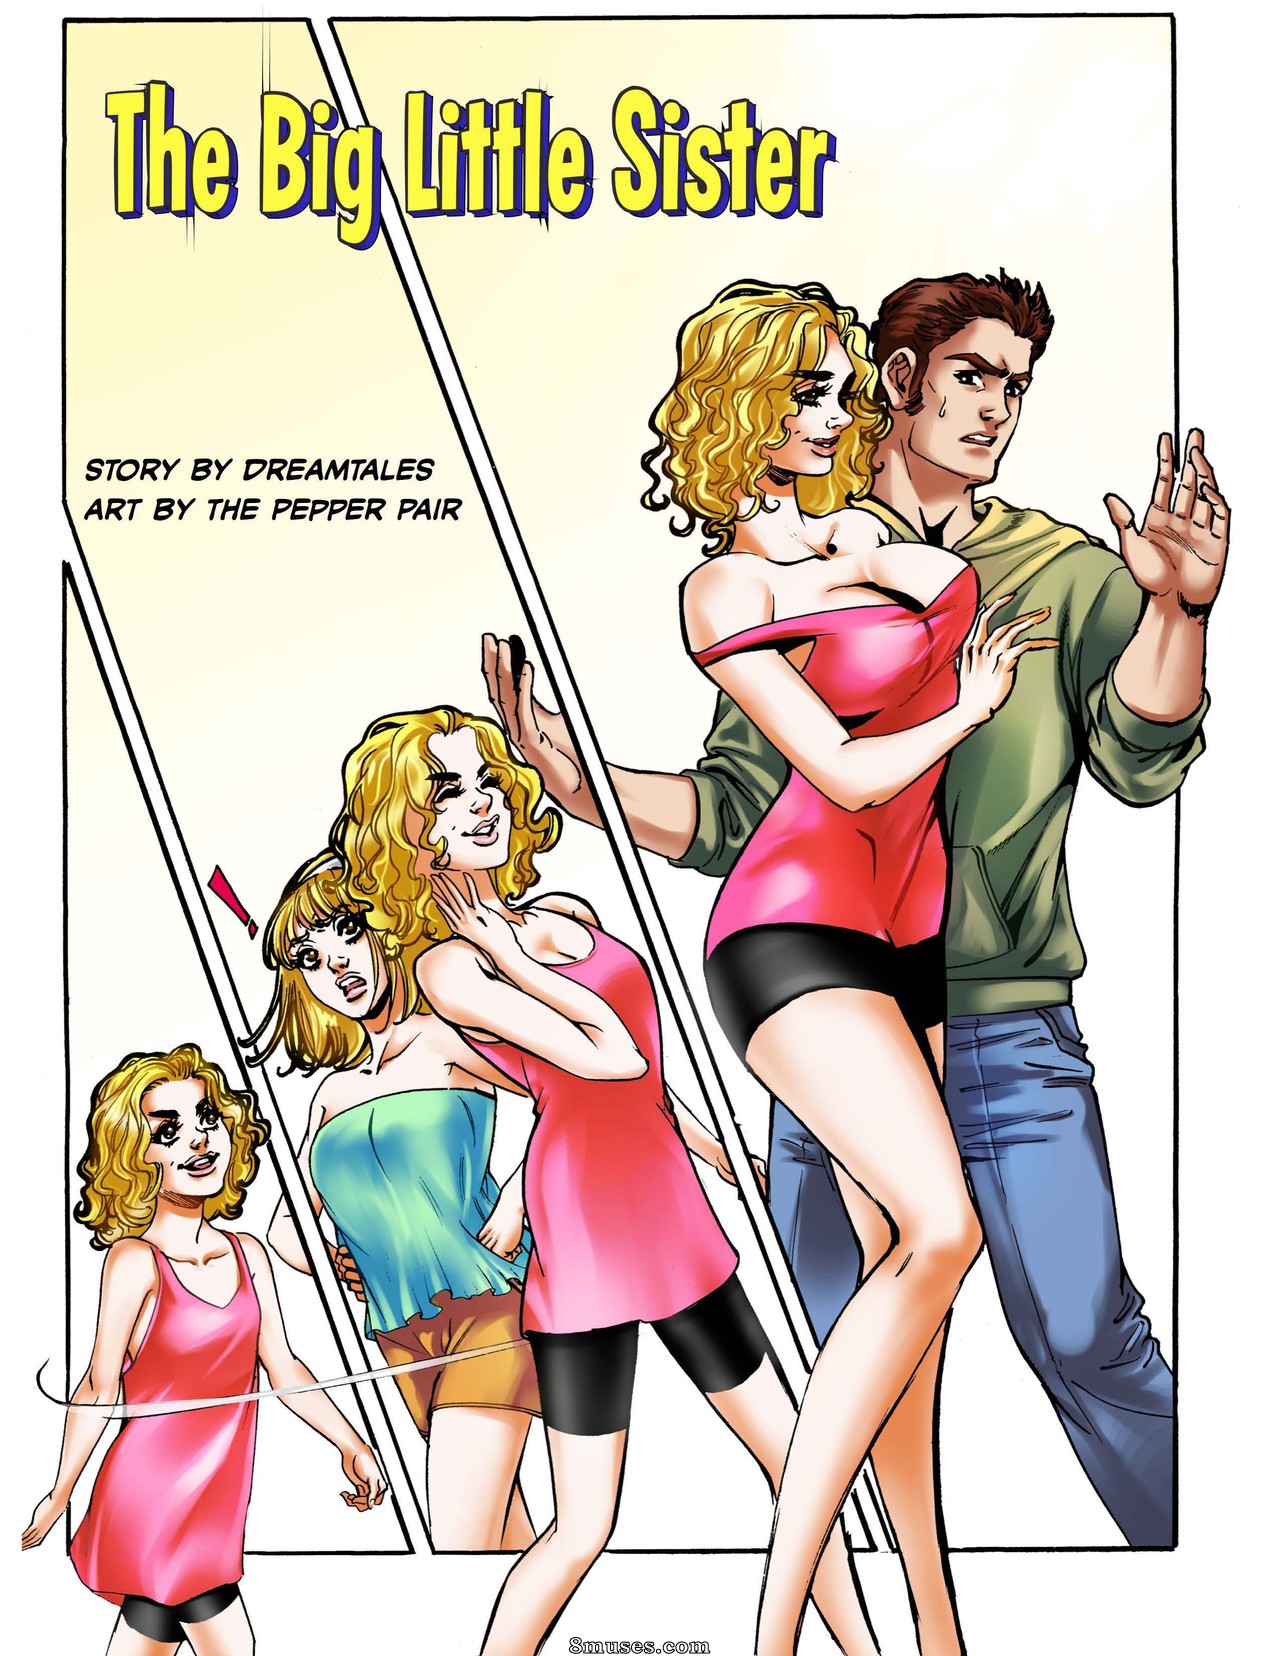 Big Brother And Sister Cartoon Porn - The Big Little Sister Issue 1 - 8muses Comics - Sex Comics and Porn Cartoons